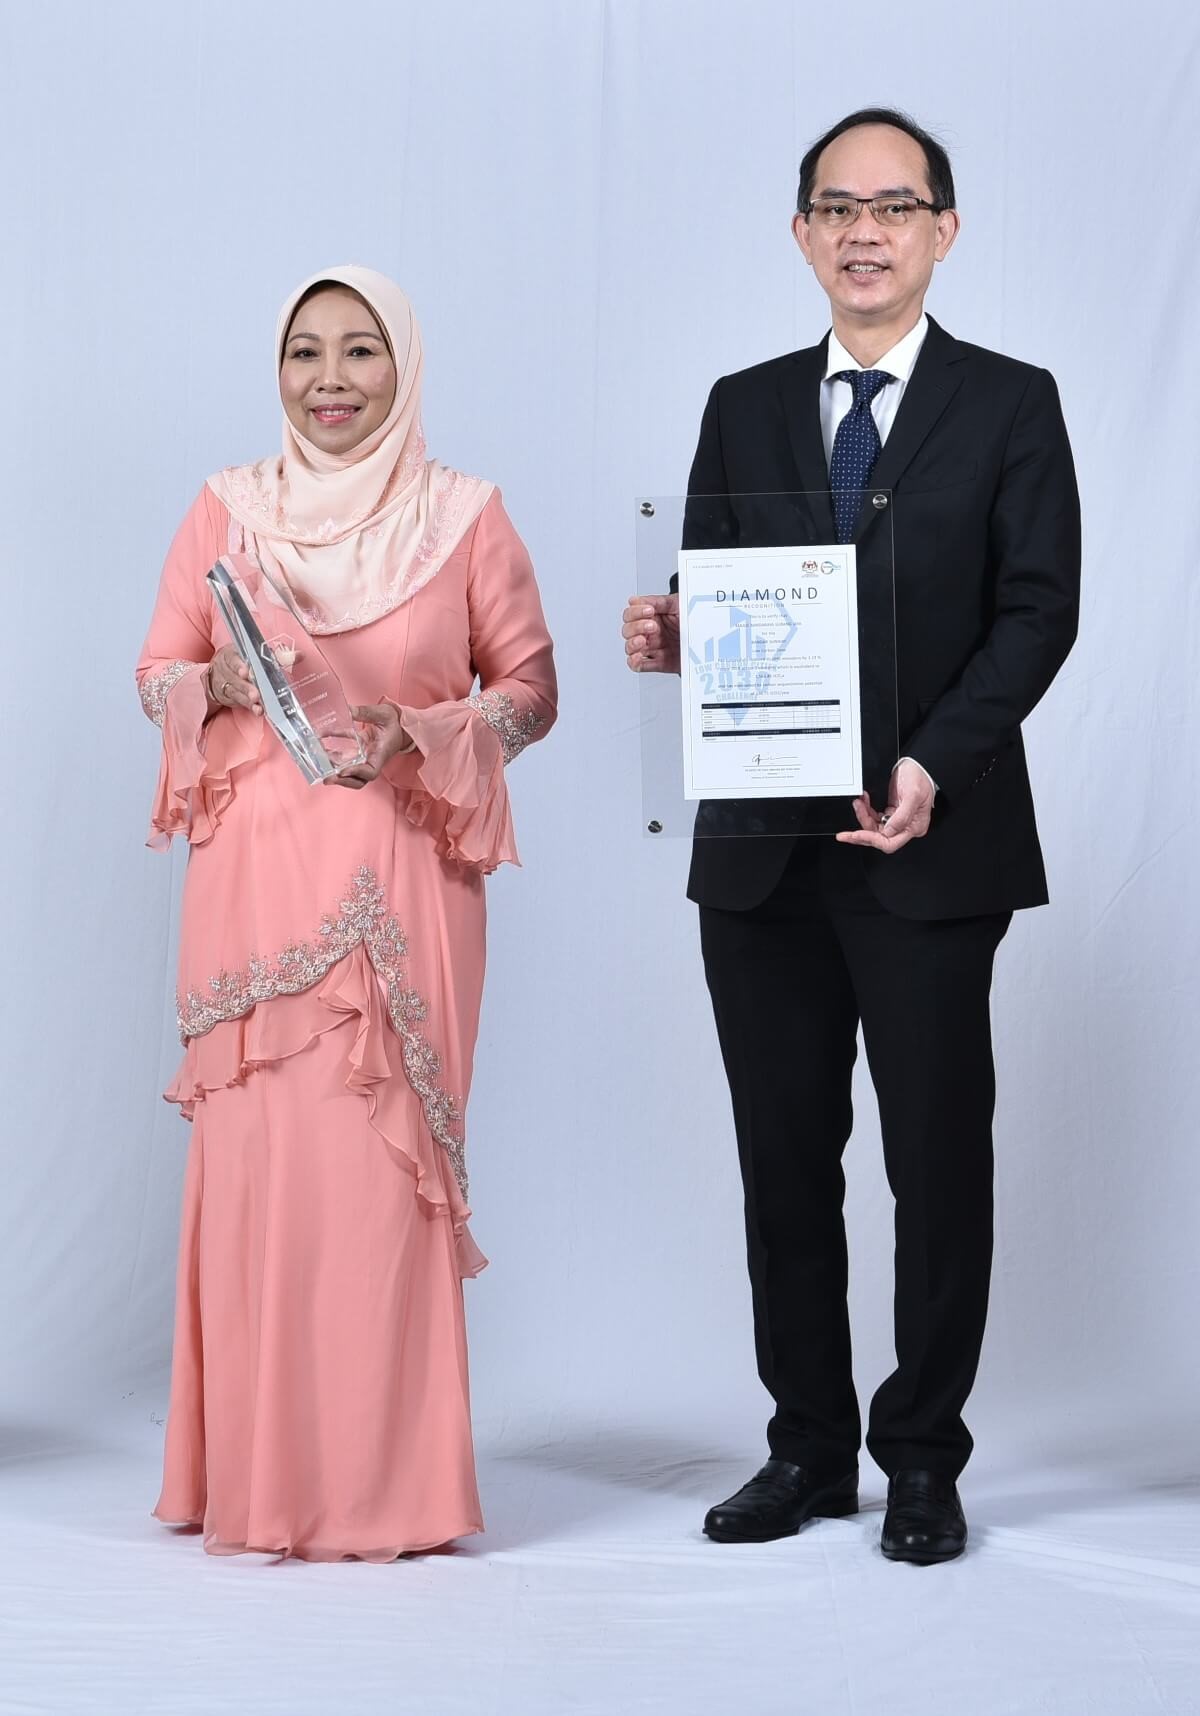 Sunway City Kuala Lumpur is deeply honoured to receive Diamond Recognition from the Subang Jaya City Council (MBSJ) at Low Carbon City Awards 2021 for our exemplary sustainability efforts